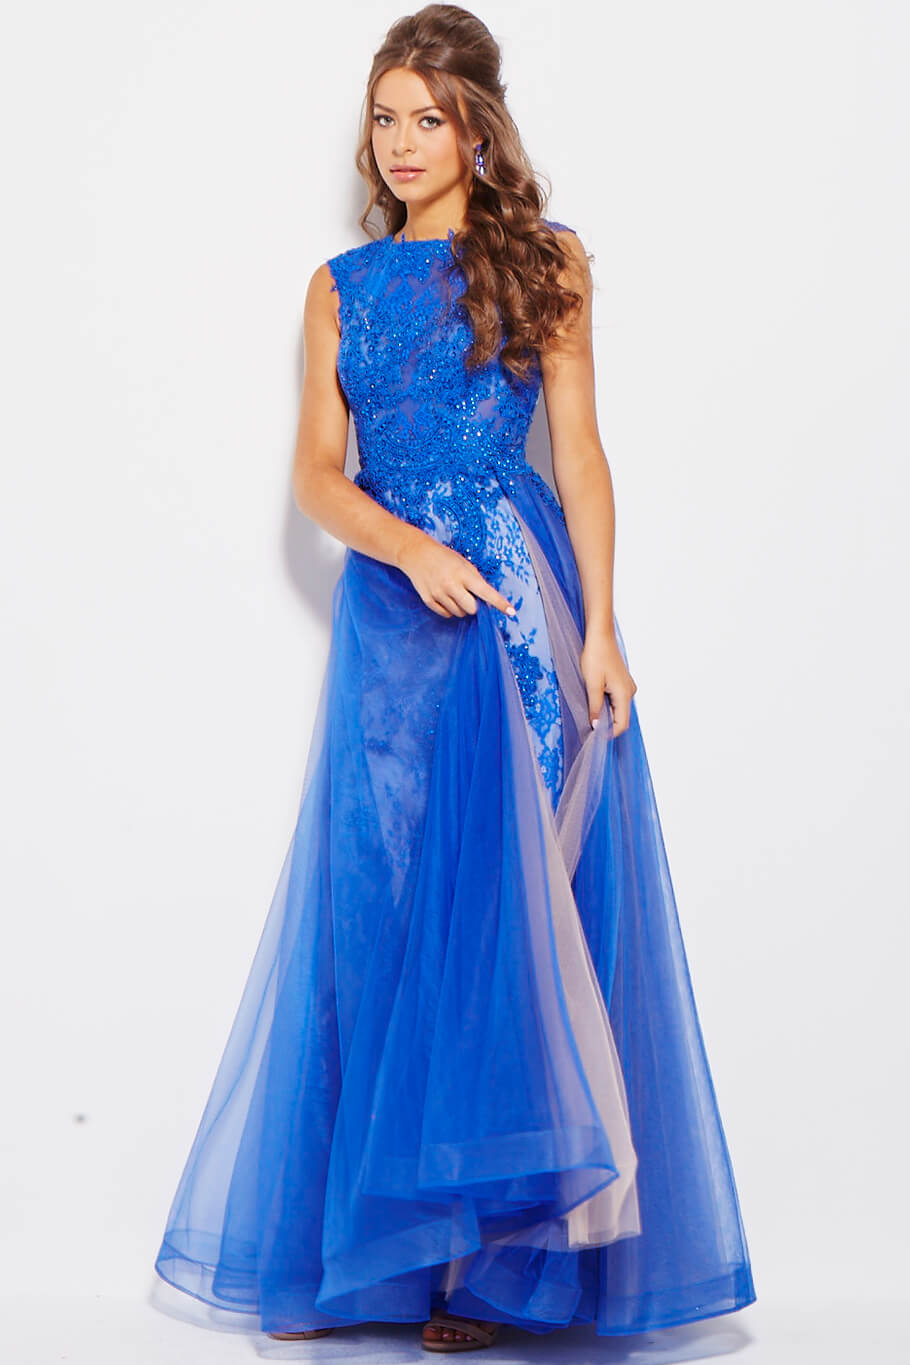 JVN by Jovani 58023 Cap sleeve embellished tulle with lace underlay prom dress tulle over skirt